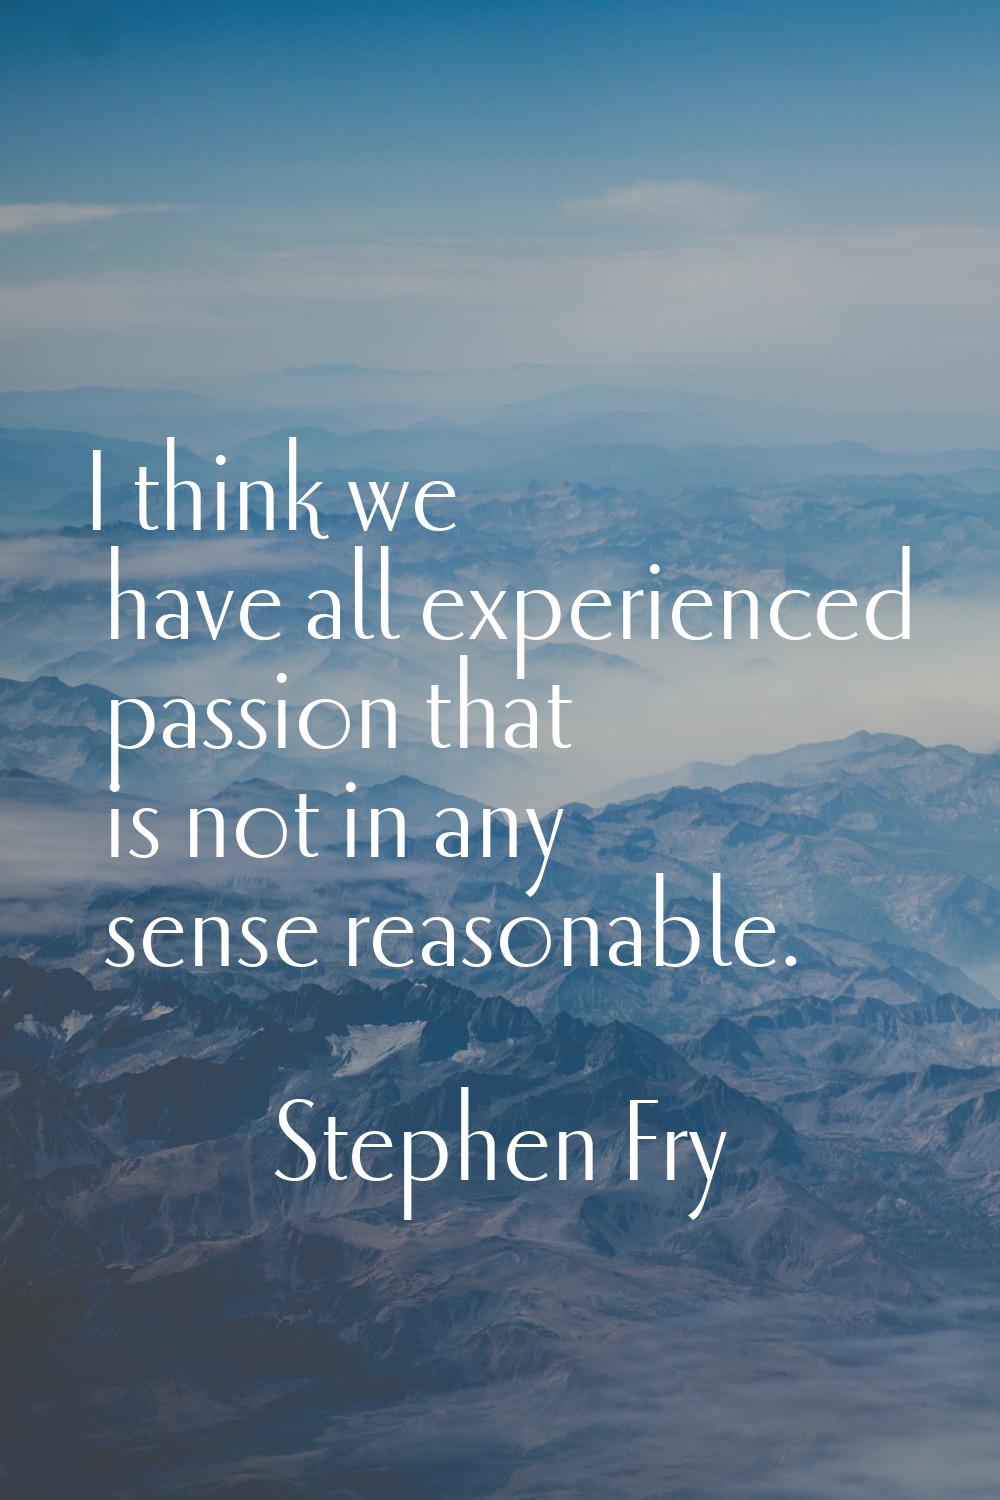 I think we have all experienced passion that is not in any sense reasonable.